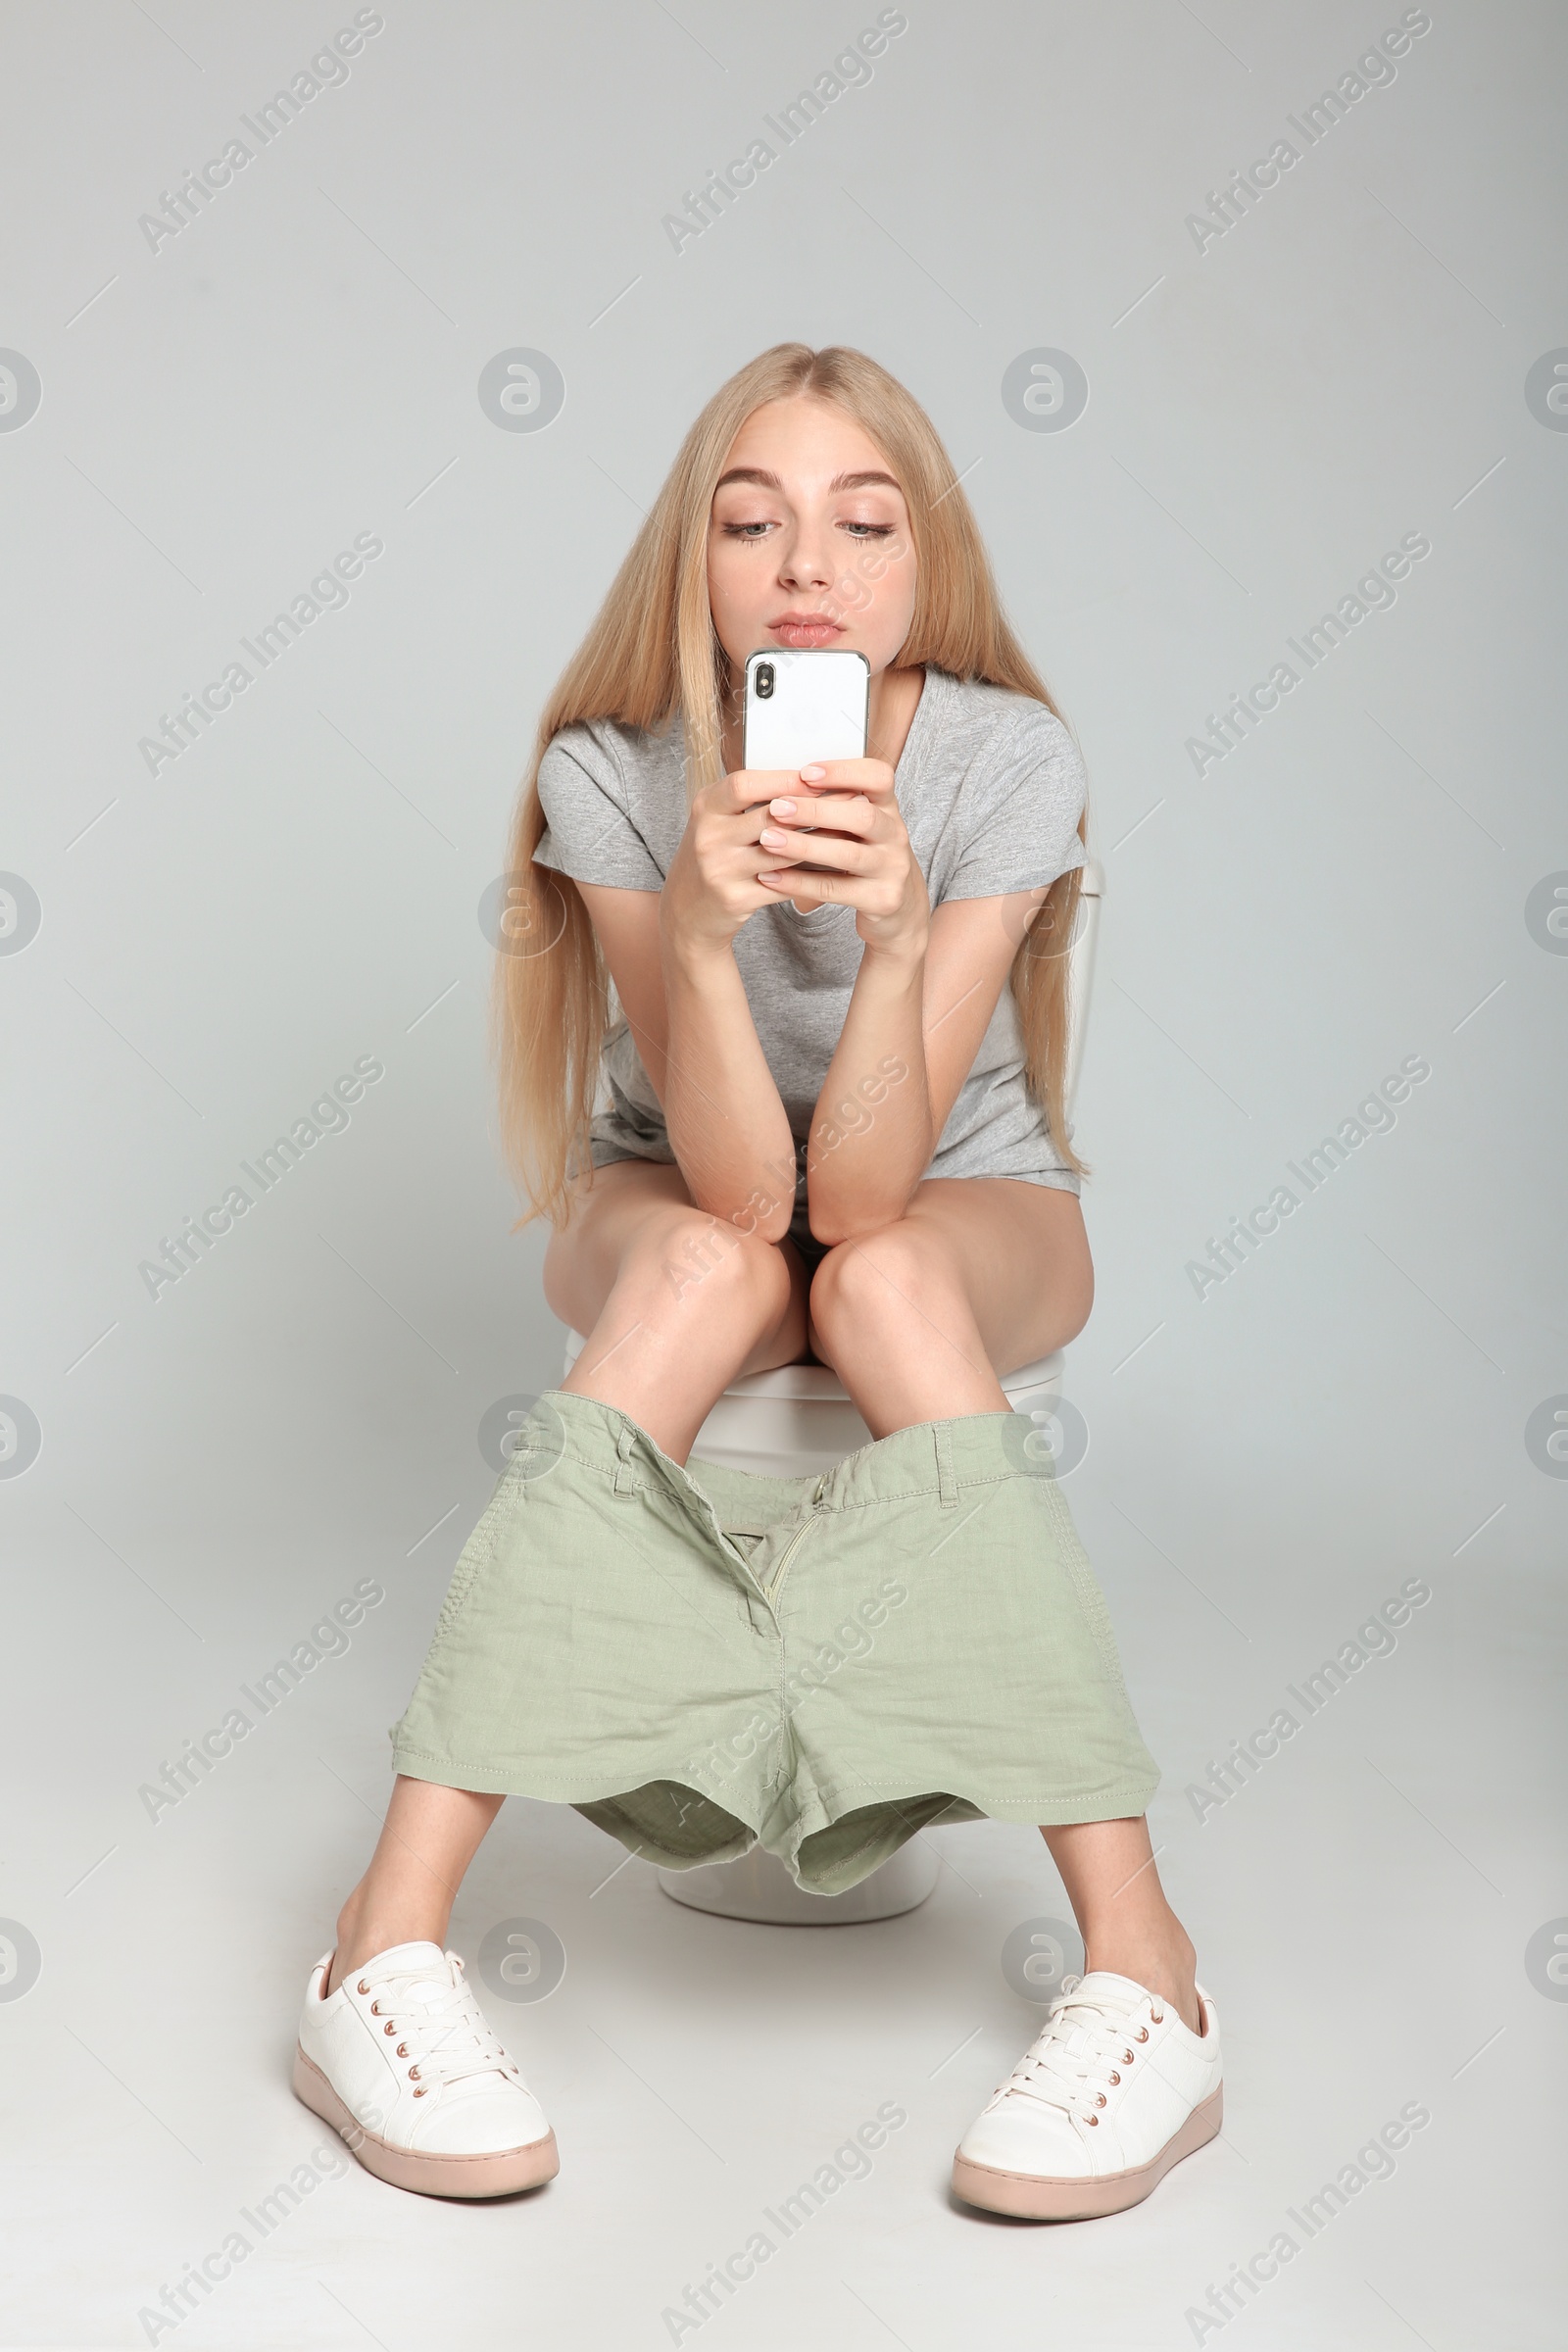 Photo of Young woman using mobile phone while sitting on toilet bowl against gray background